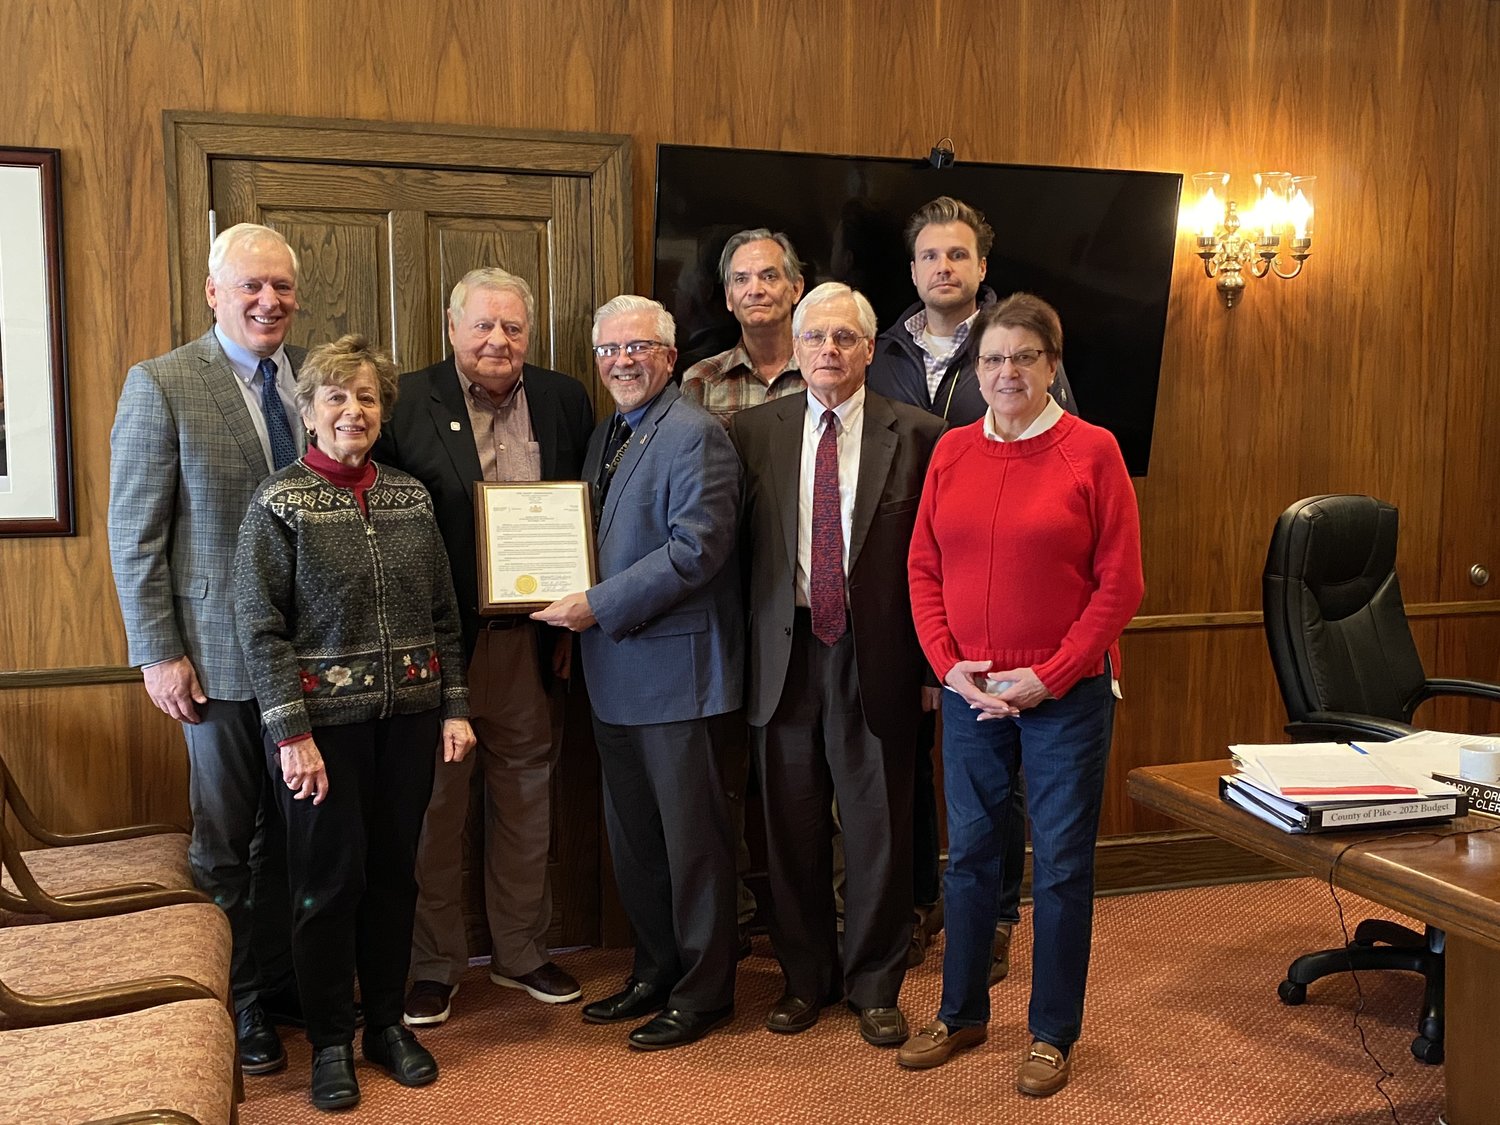 The Pike County Commissioners have recognized Greater Pike Community Foundation’s co-founder and board chair, Jim Pedranti with a resolution of accomplishment. From left: Commissioner Ronald Schmalzle, GPCF Board Secretary Roseann Kalish, GPCF Board Chair Jim Pedranti, Commissioner Chair Matt Osterberg, GPCF Board member Mayor Sean Strub, commissioner Steve Guccini, GPCF Board member Luke Turano, and GPCF Board Member Maryanne Monte.